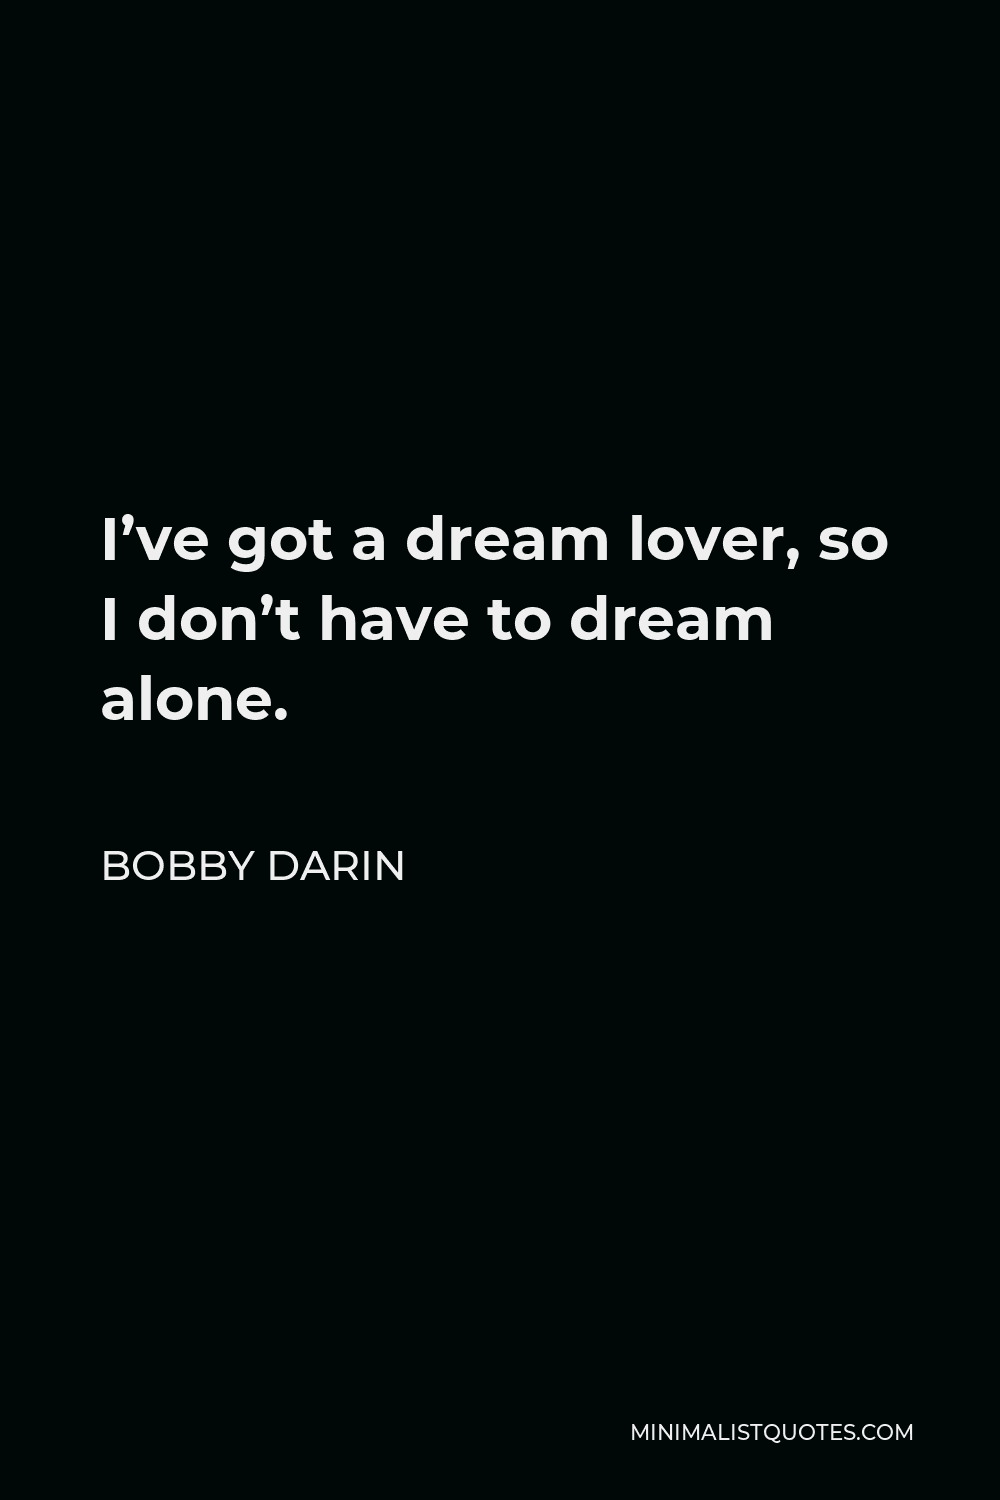 Bobby Darin Quote - I’ve got a dream lover, so I don’t have to dream alone.